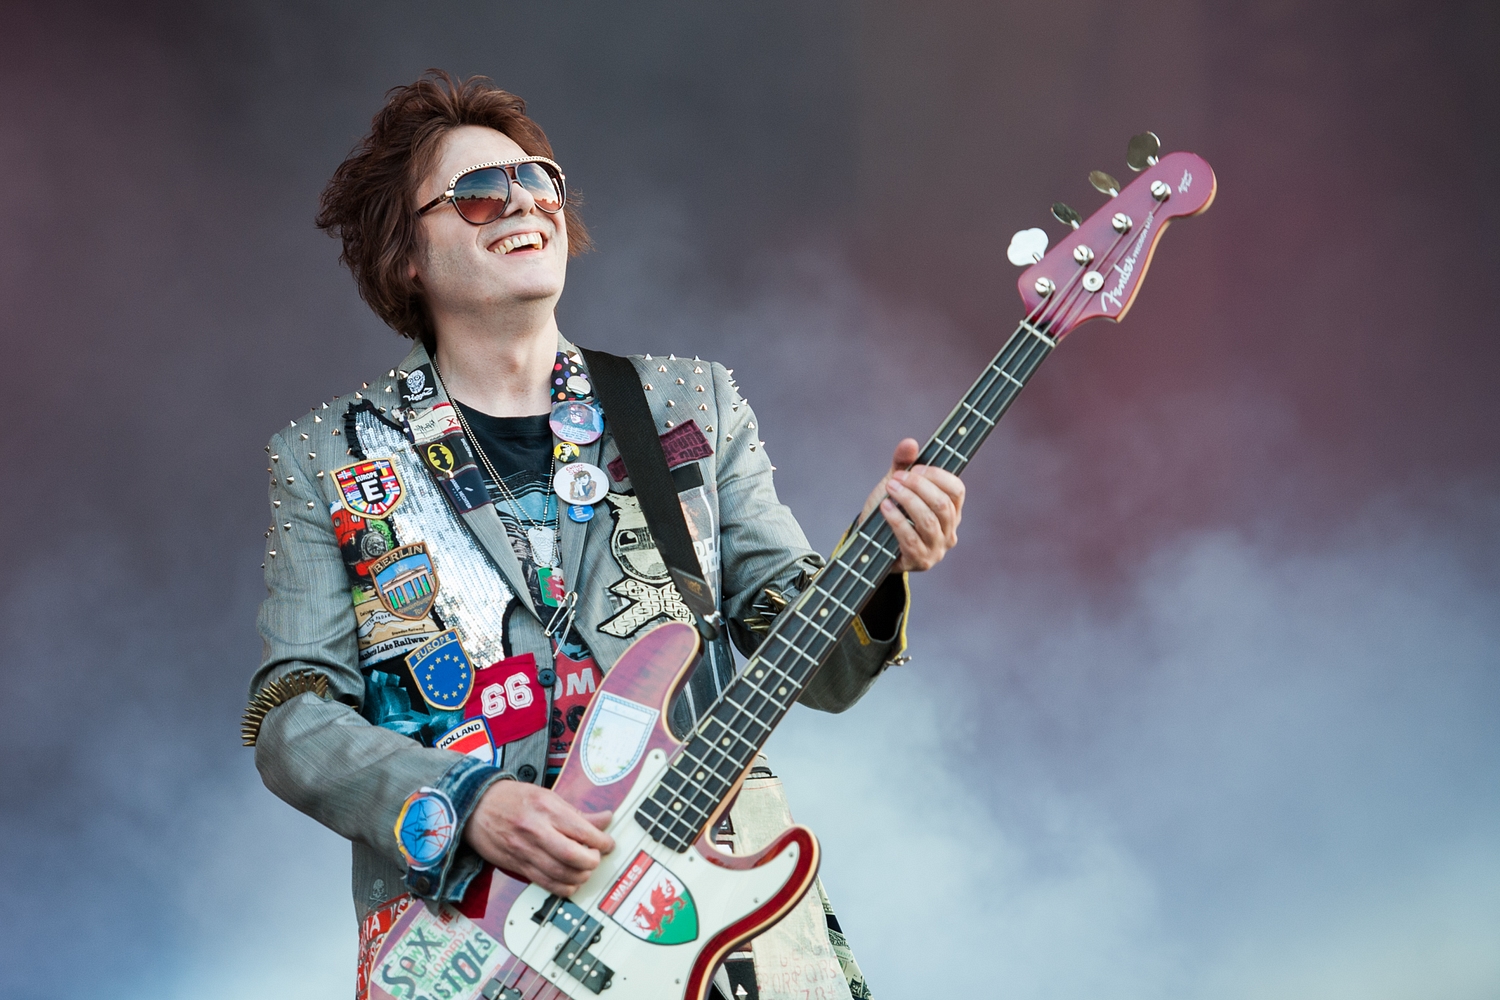 Manic Street Preachers bring devotion to the dedicated at Latitude 2015